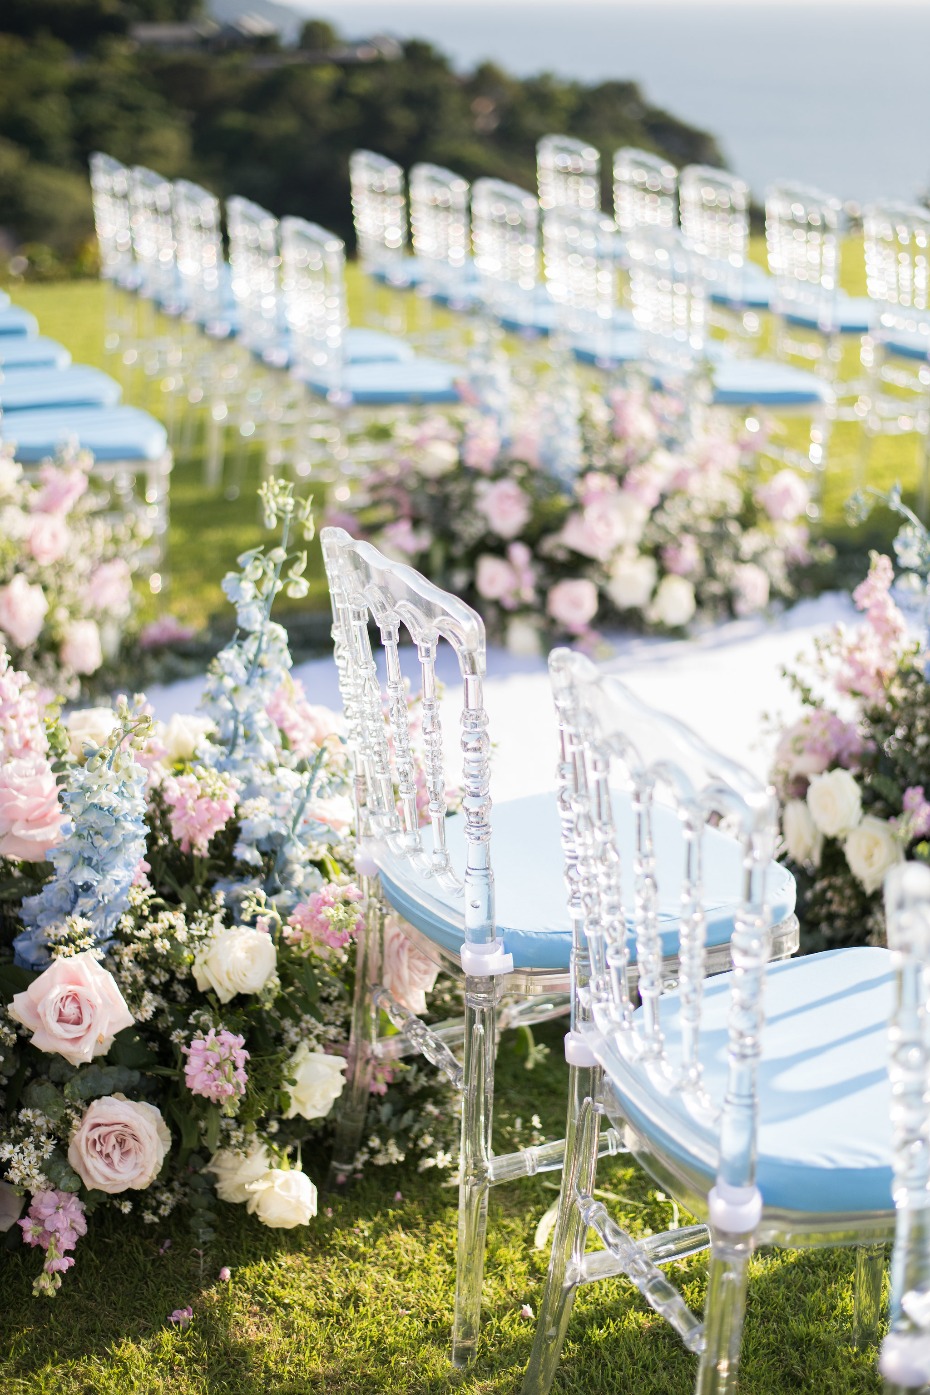 Crystal chairs for ceremony